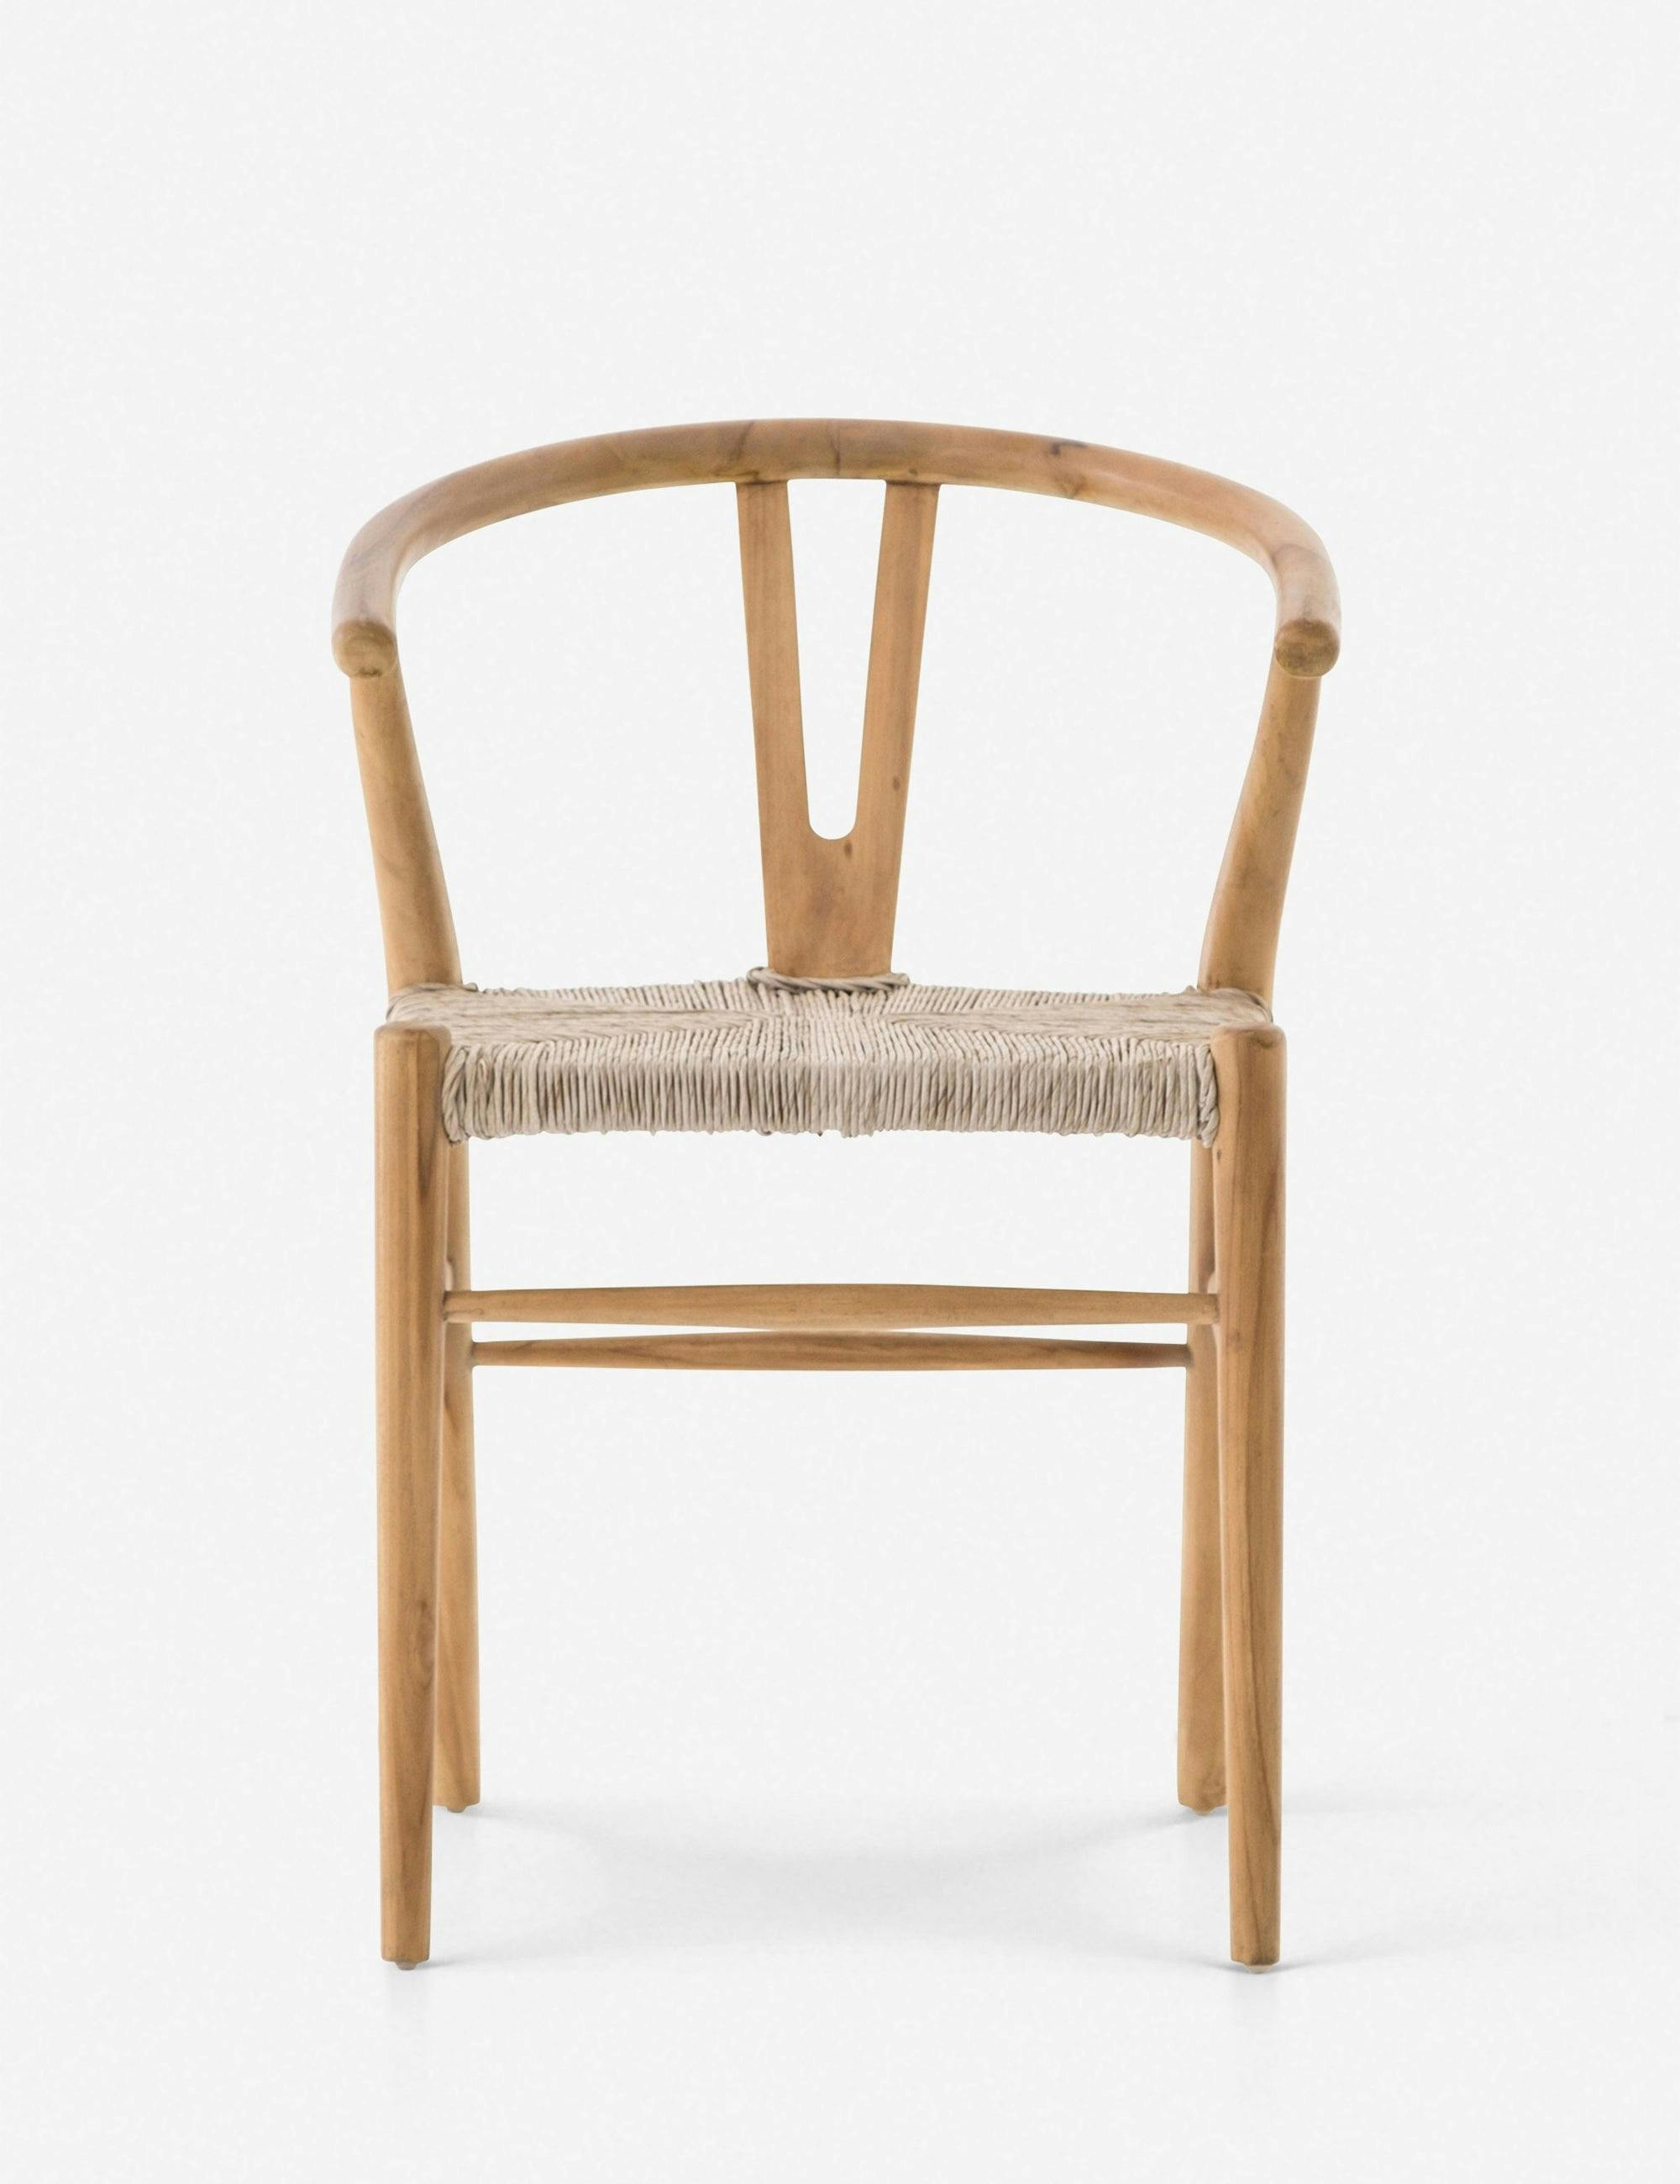 Contemporary Wishbone Teak & Leather Armchair in Natural Brown